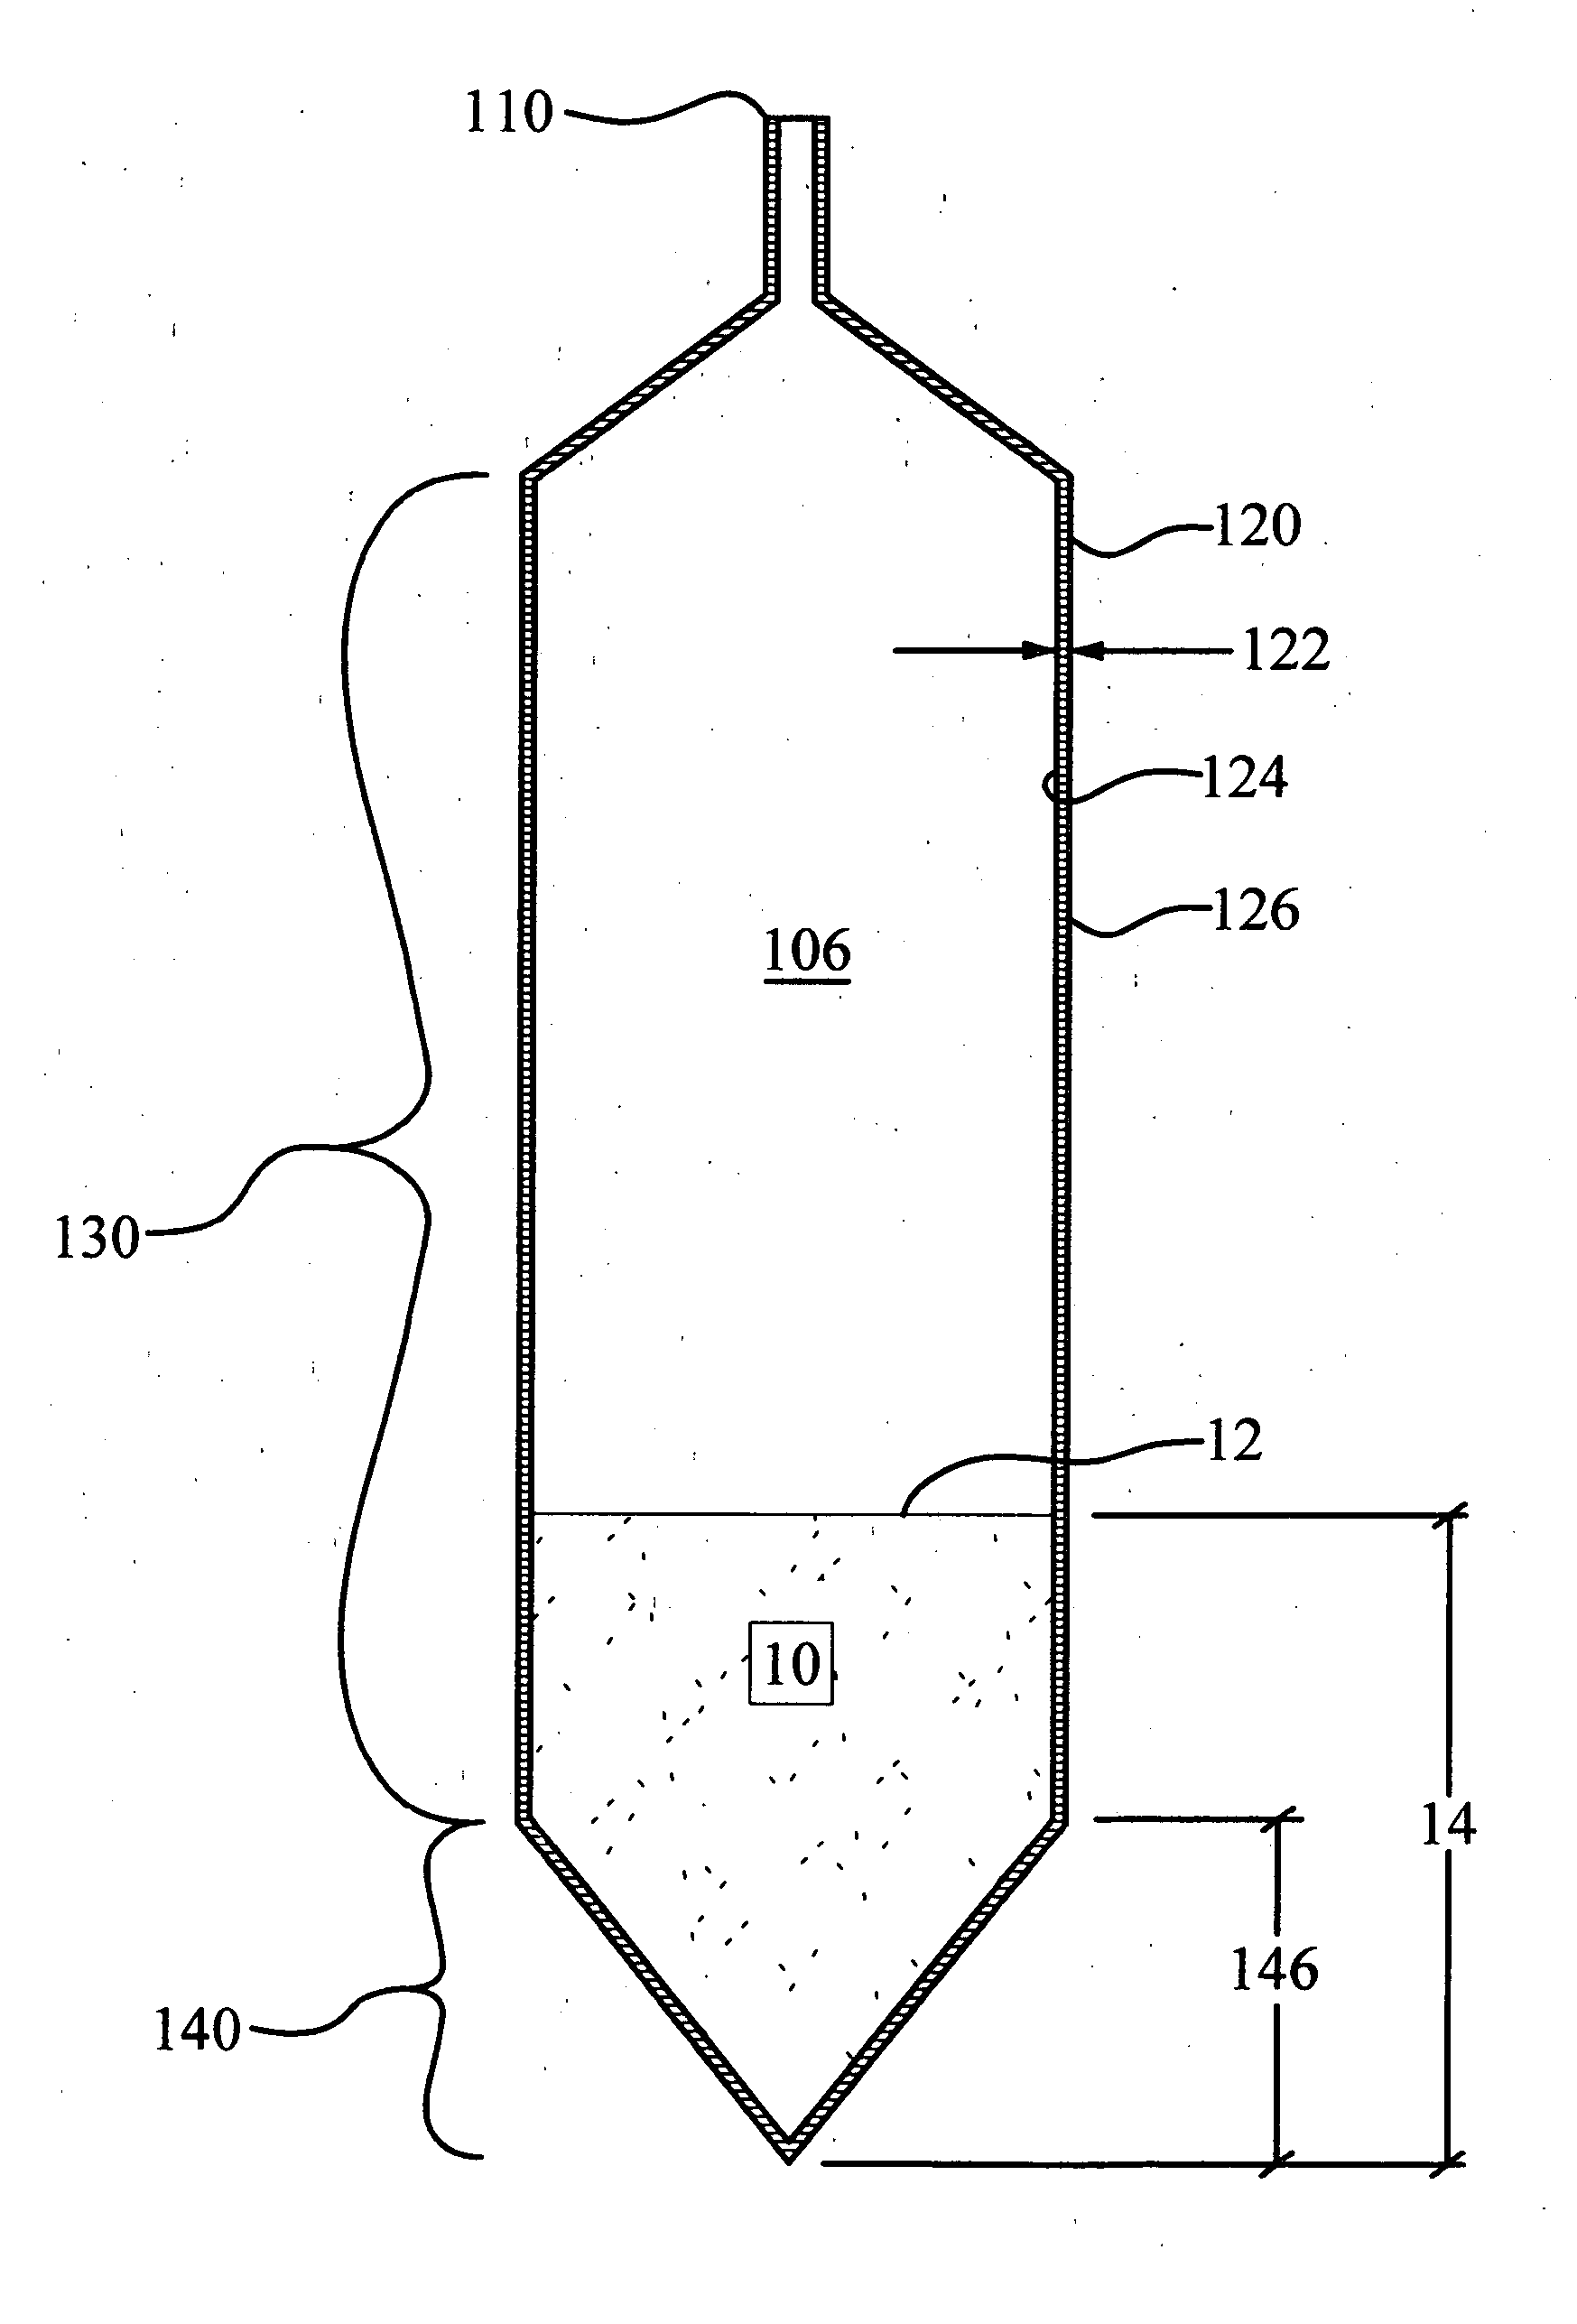 Variable cross-section containment structure liquid measurement device